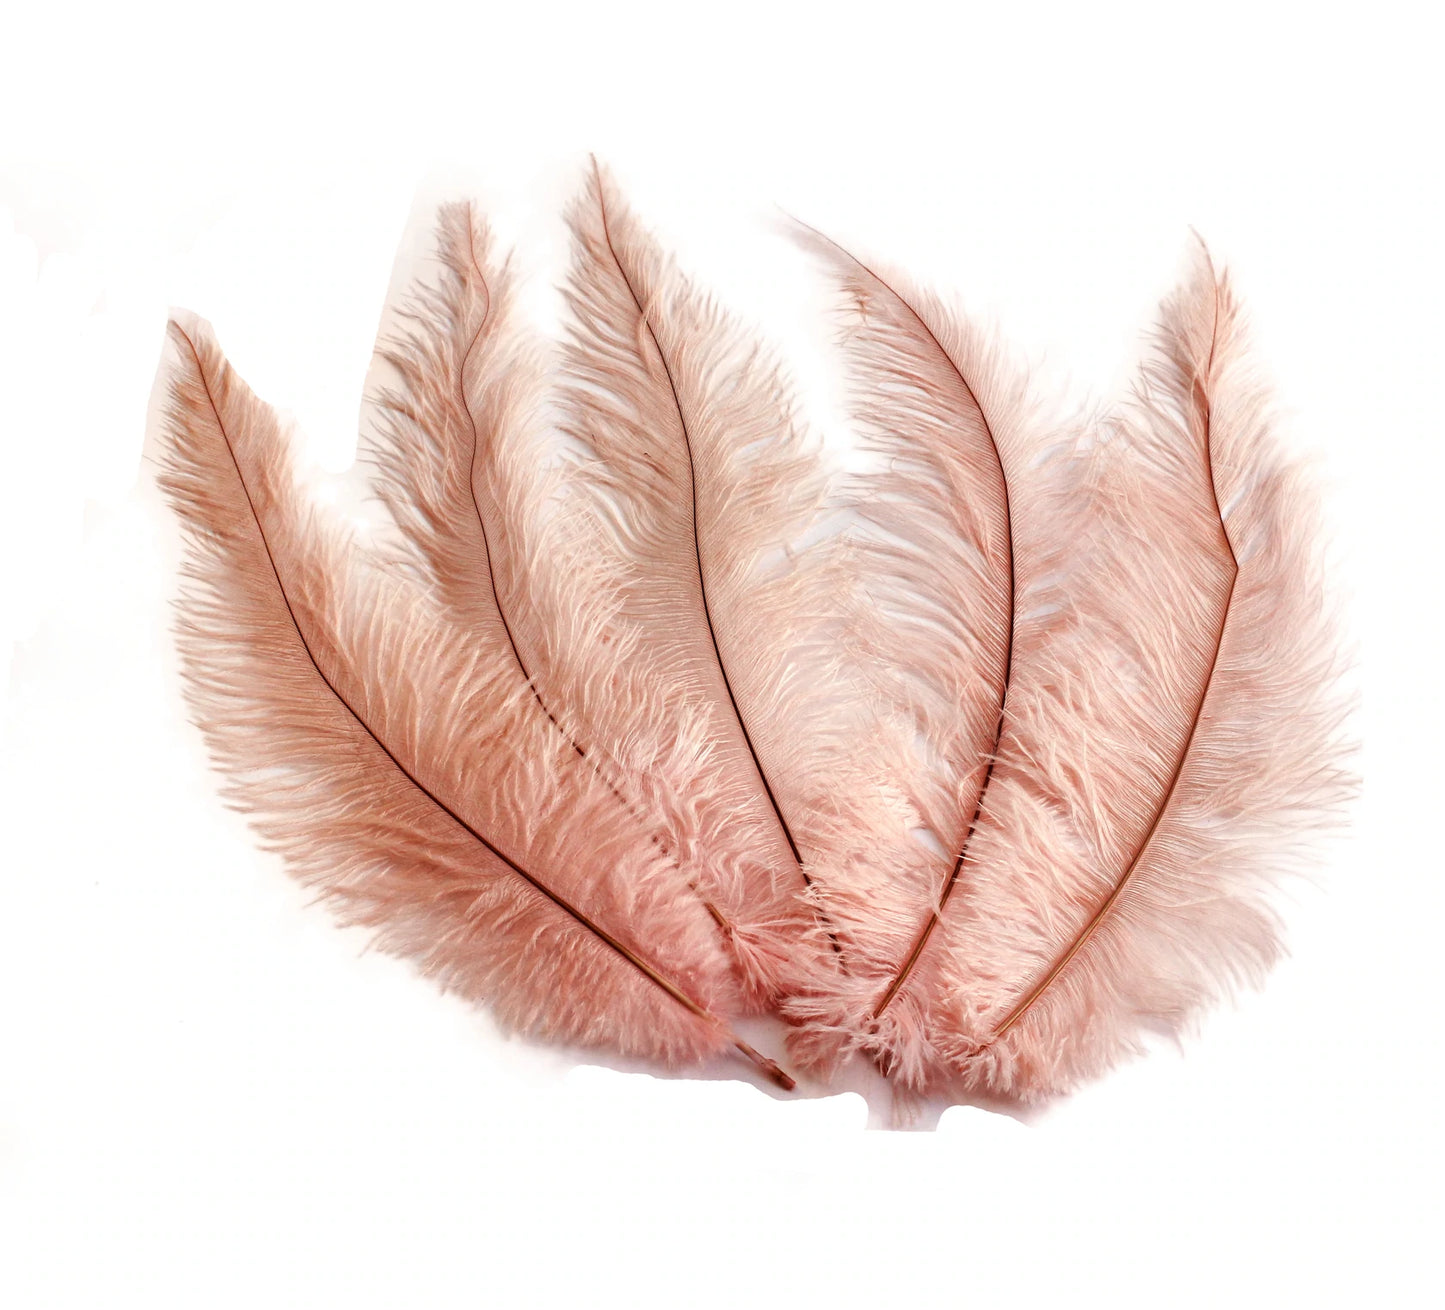 Ostrich Feather Spad Plumes 15-18" (Baby Pink) - Buy Ostrich Feathers